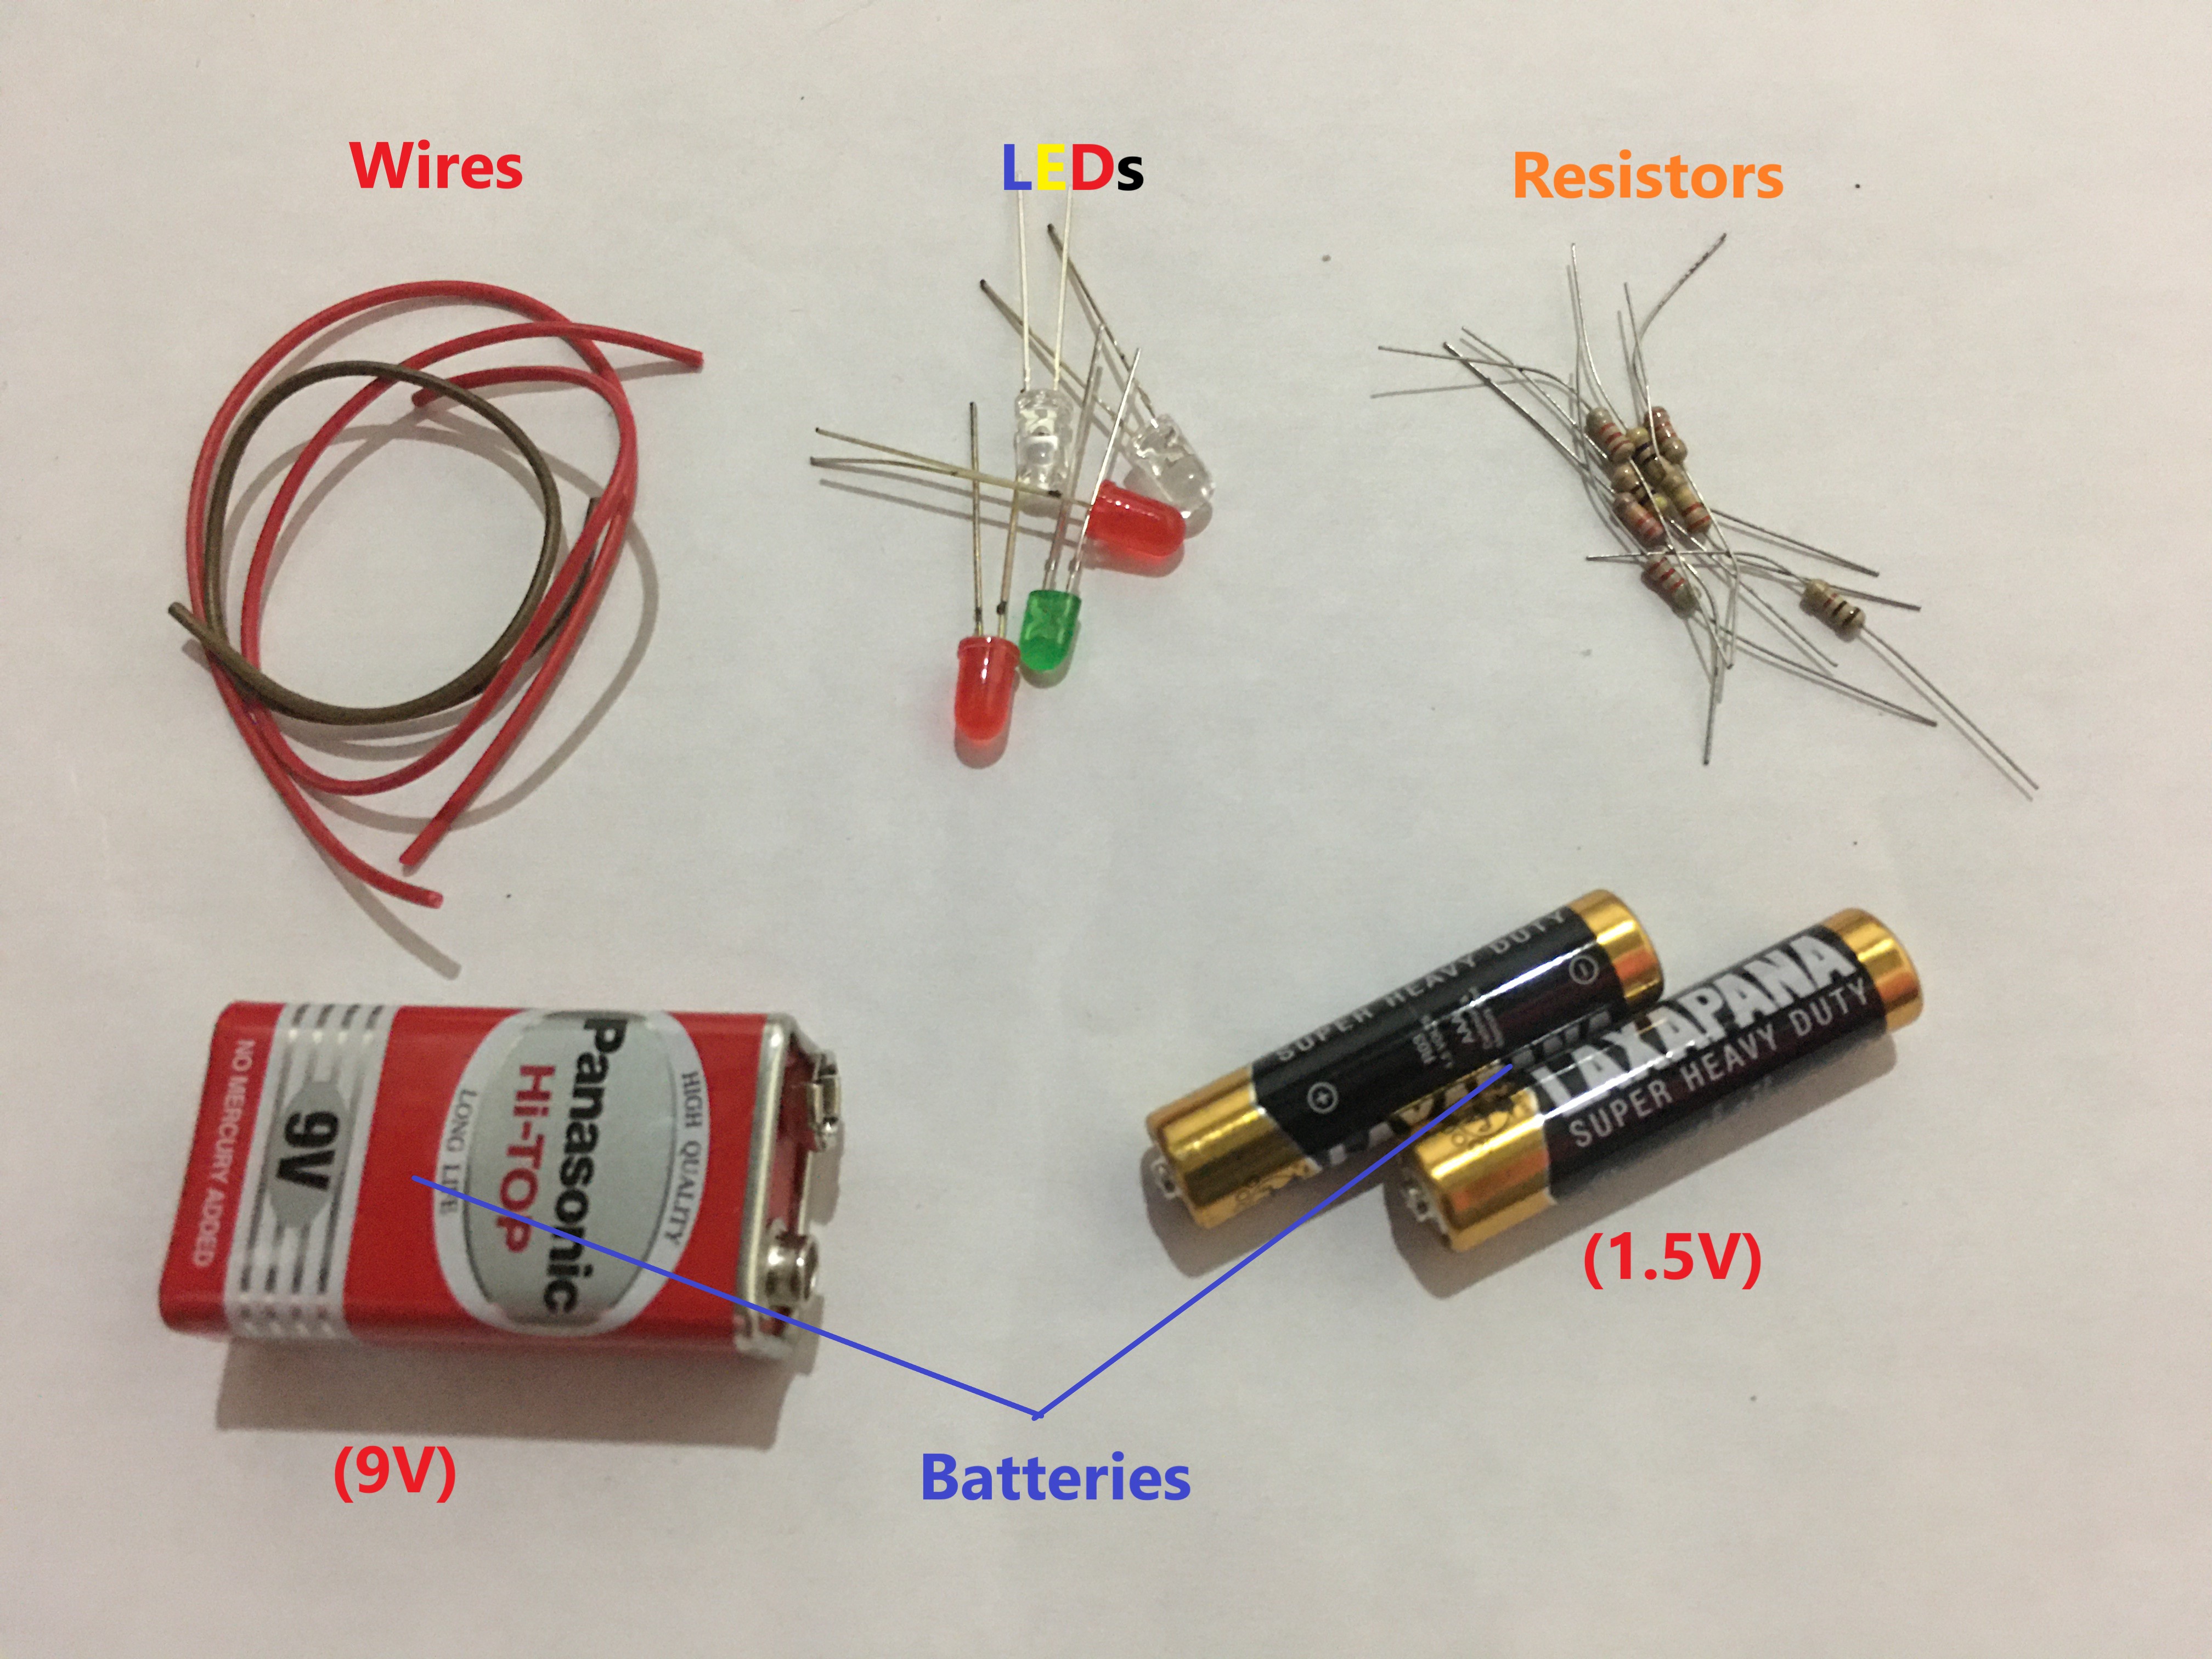 File:9v battery and led components battery, LED, resistor).jpg - Wikimedia Commons